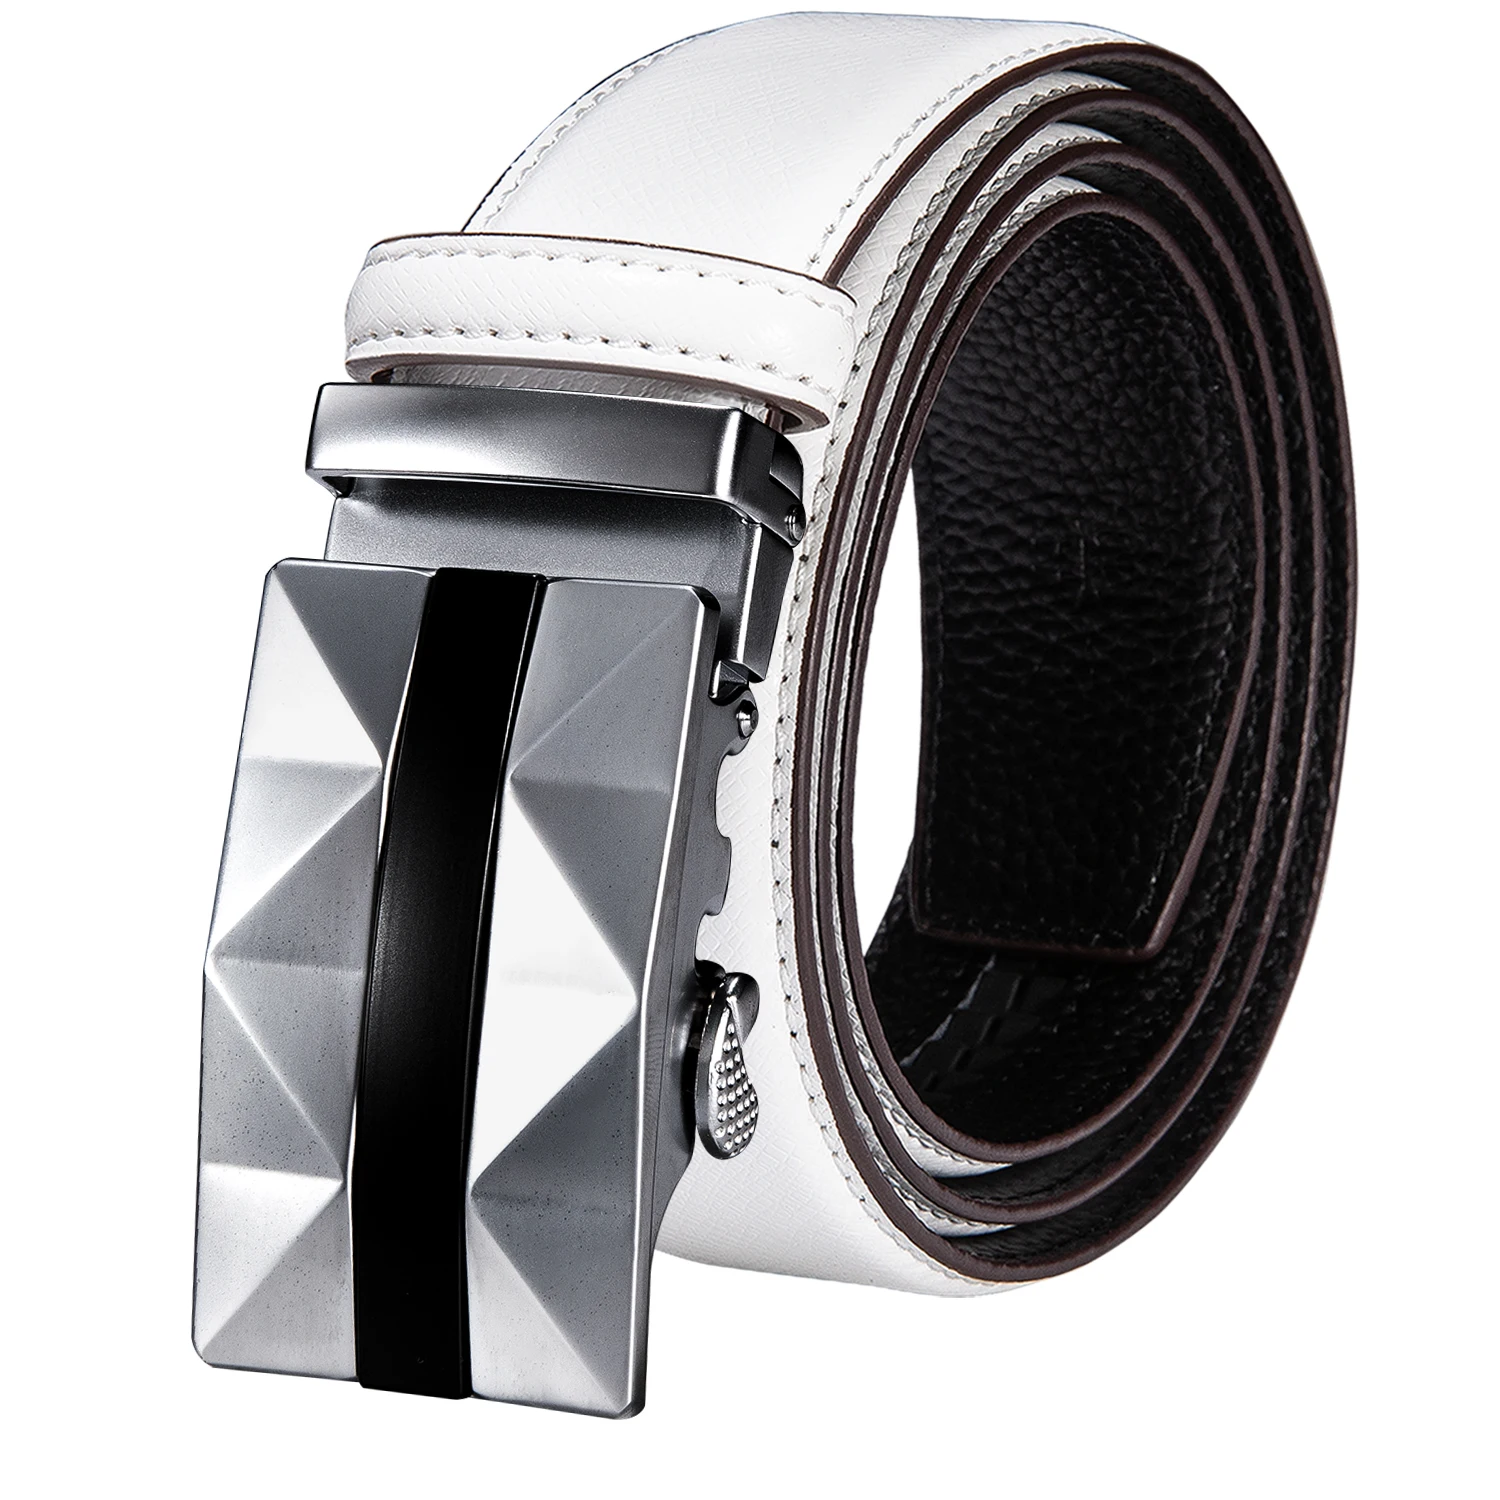 White Real Leather Mens Belts Automatic Buckles Men Belt Ratchet Waistband Straps for Dress Jeans Sliding Buckle Easy Release